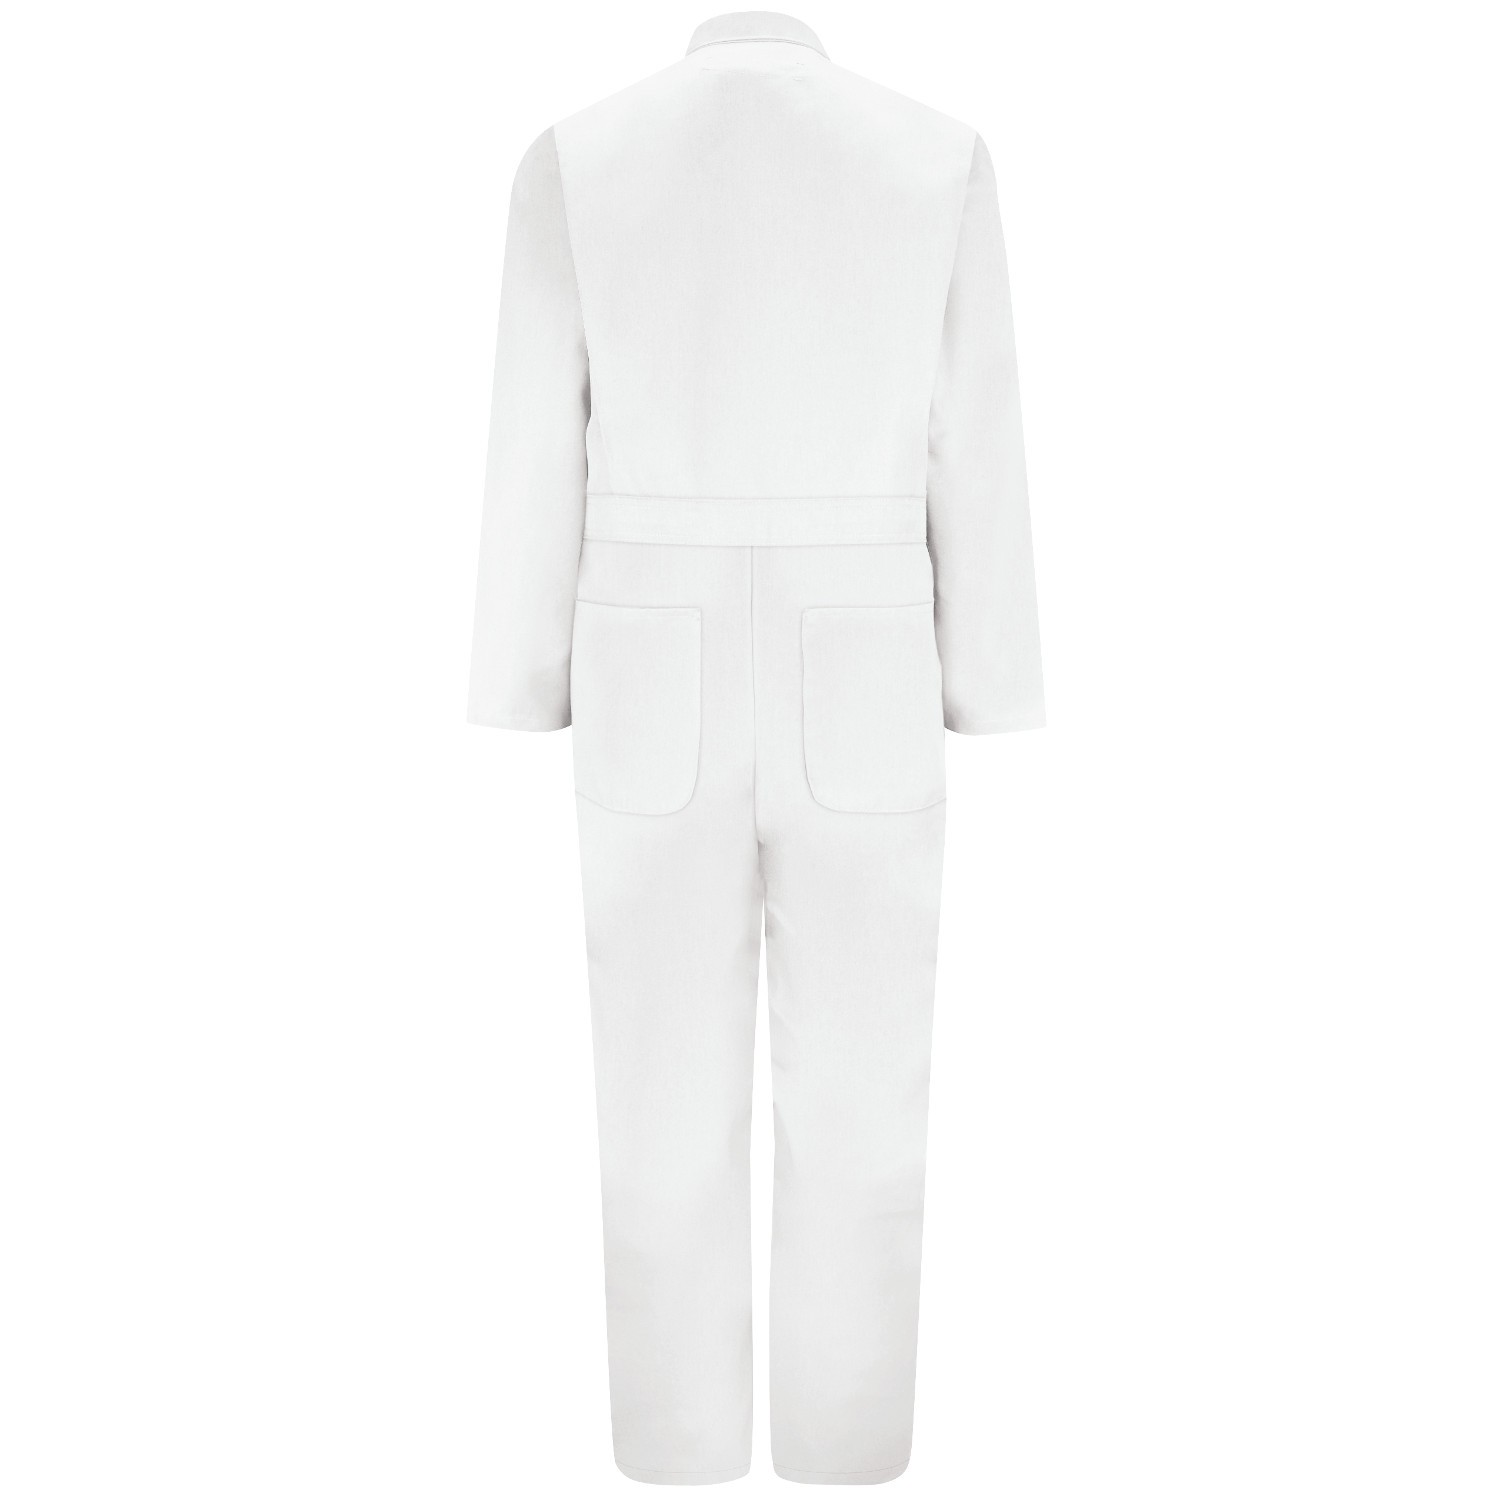 Red Kap CT10 Twill Action Back Coveralls - White | FullSource.com